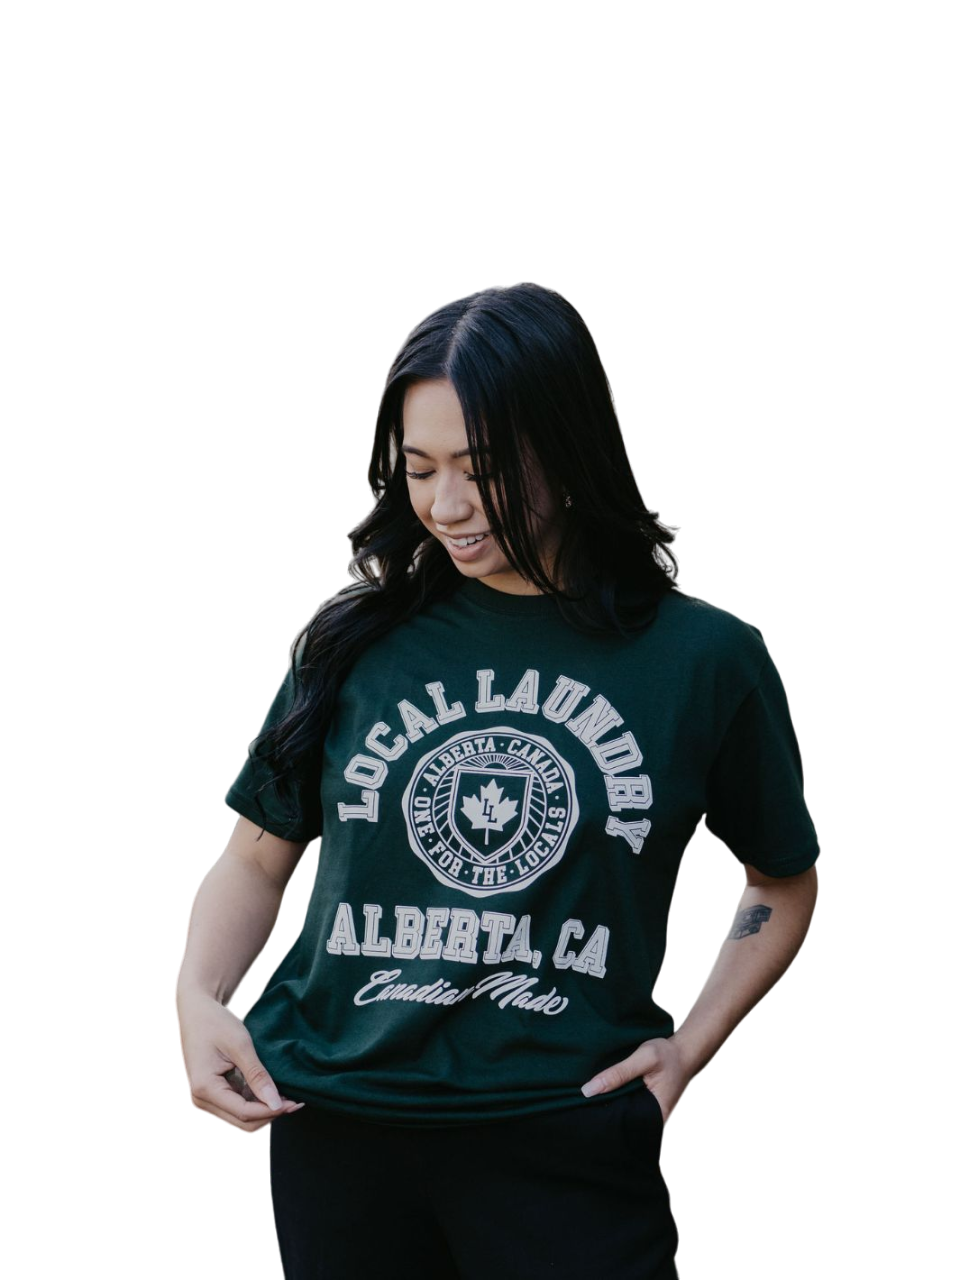 Individual sporting the Local Laundry Forest Green Varsity t-shirt, featuring a contrasting white graphics exclusive to Local Laundry. Canadian made fashion that is sustainable and ethical.